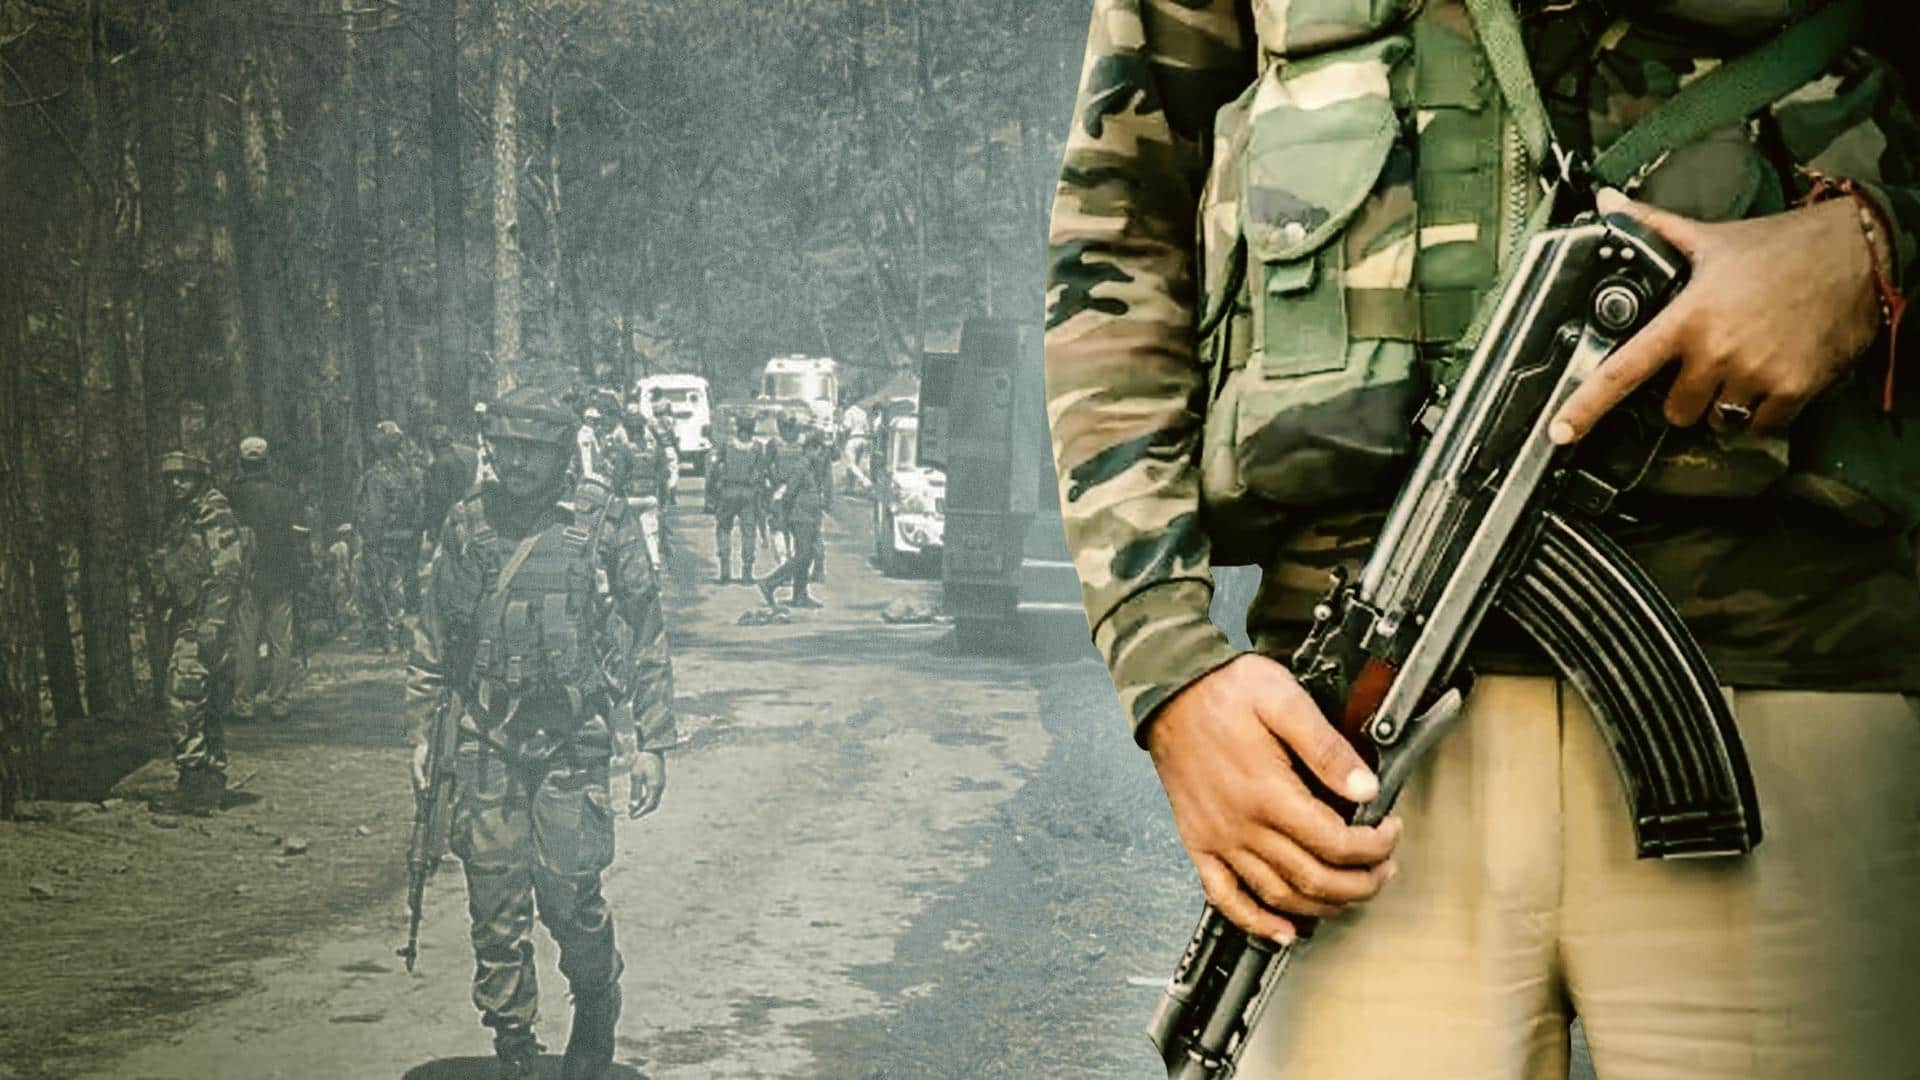 Pakistan using 'guerilla attacks' on security forces in J&K: Report